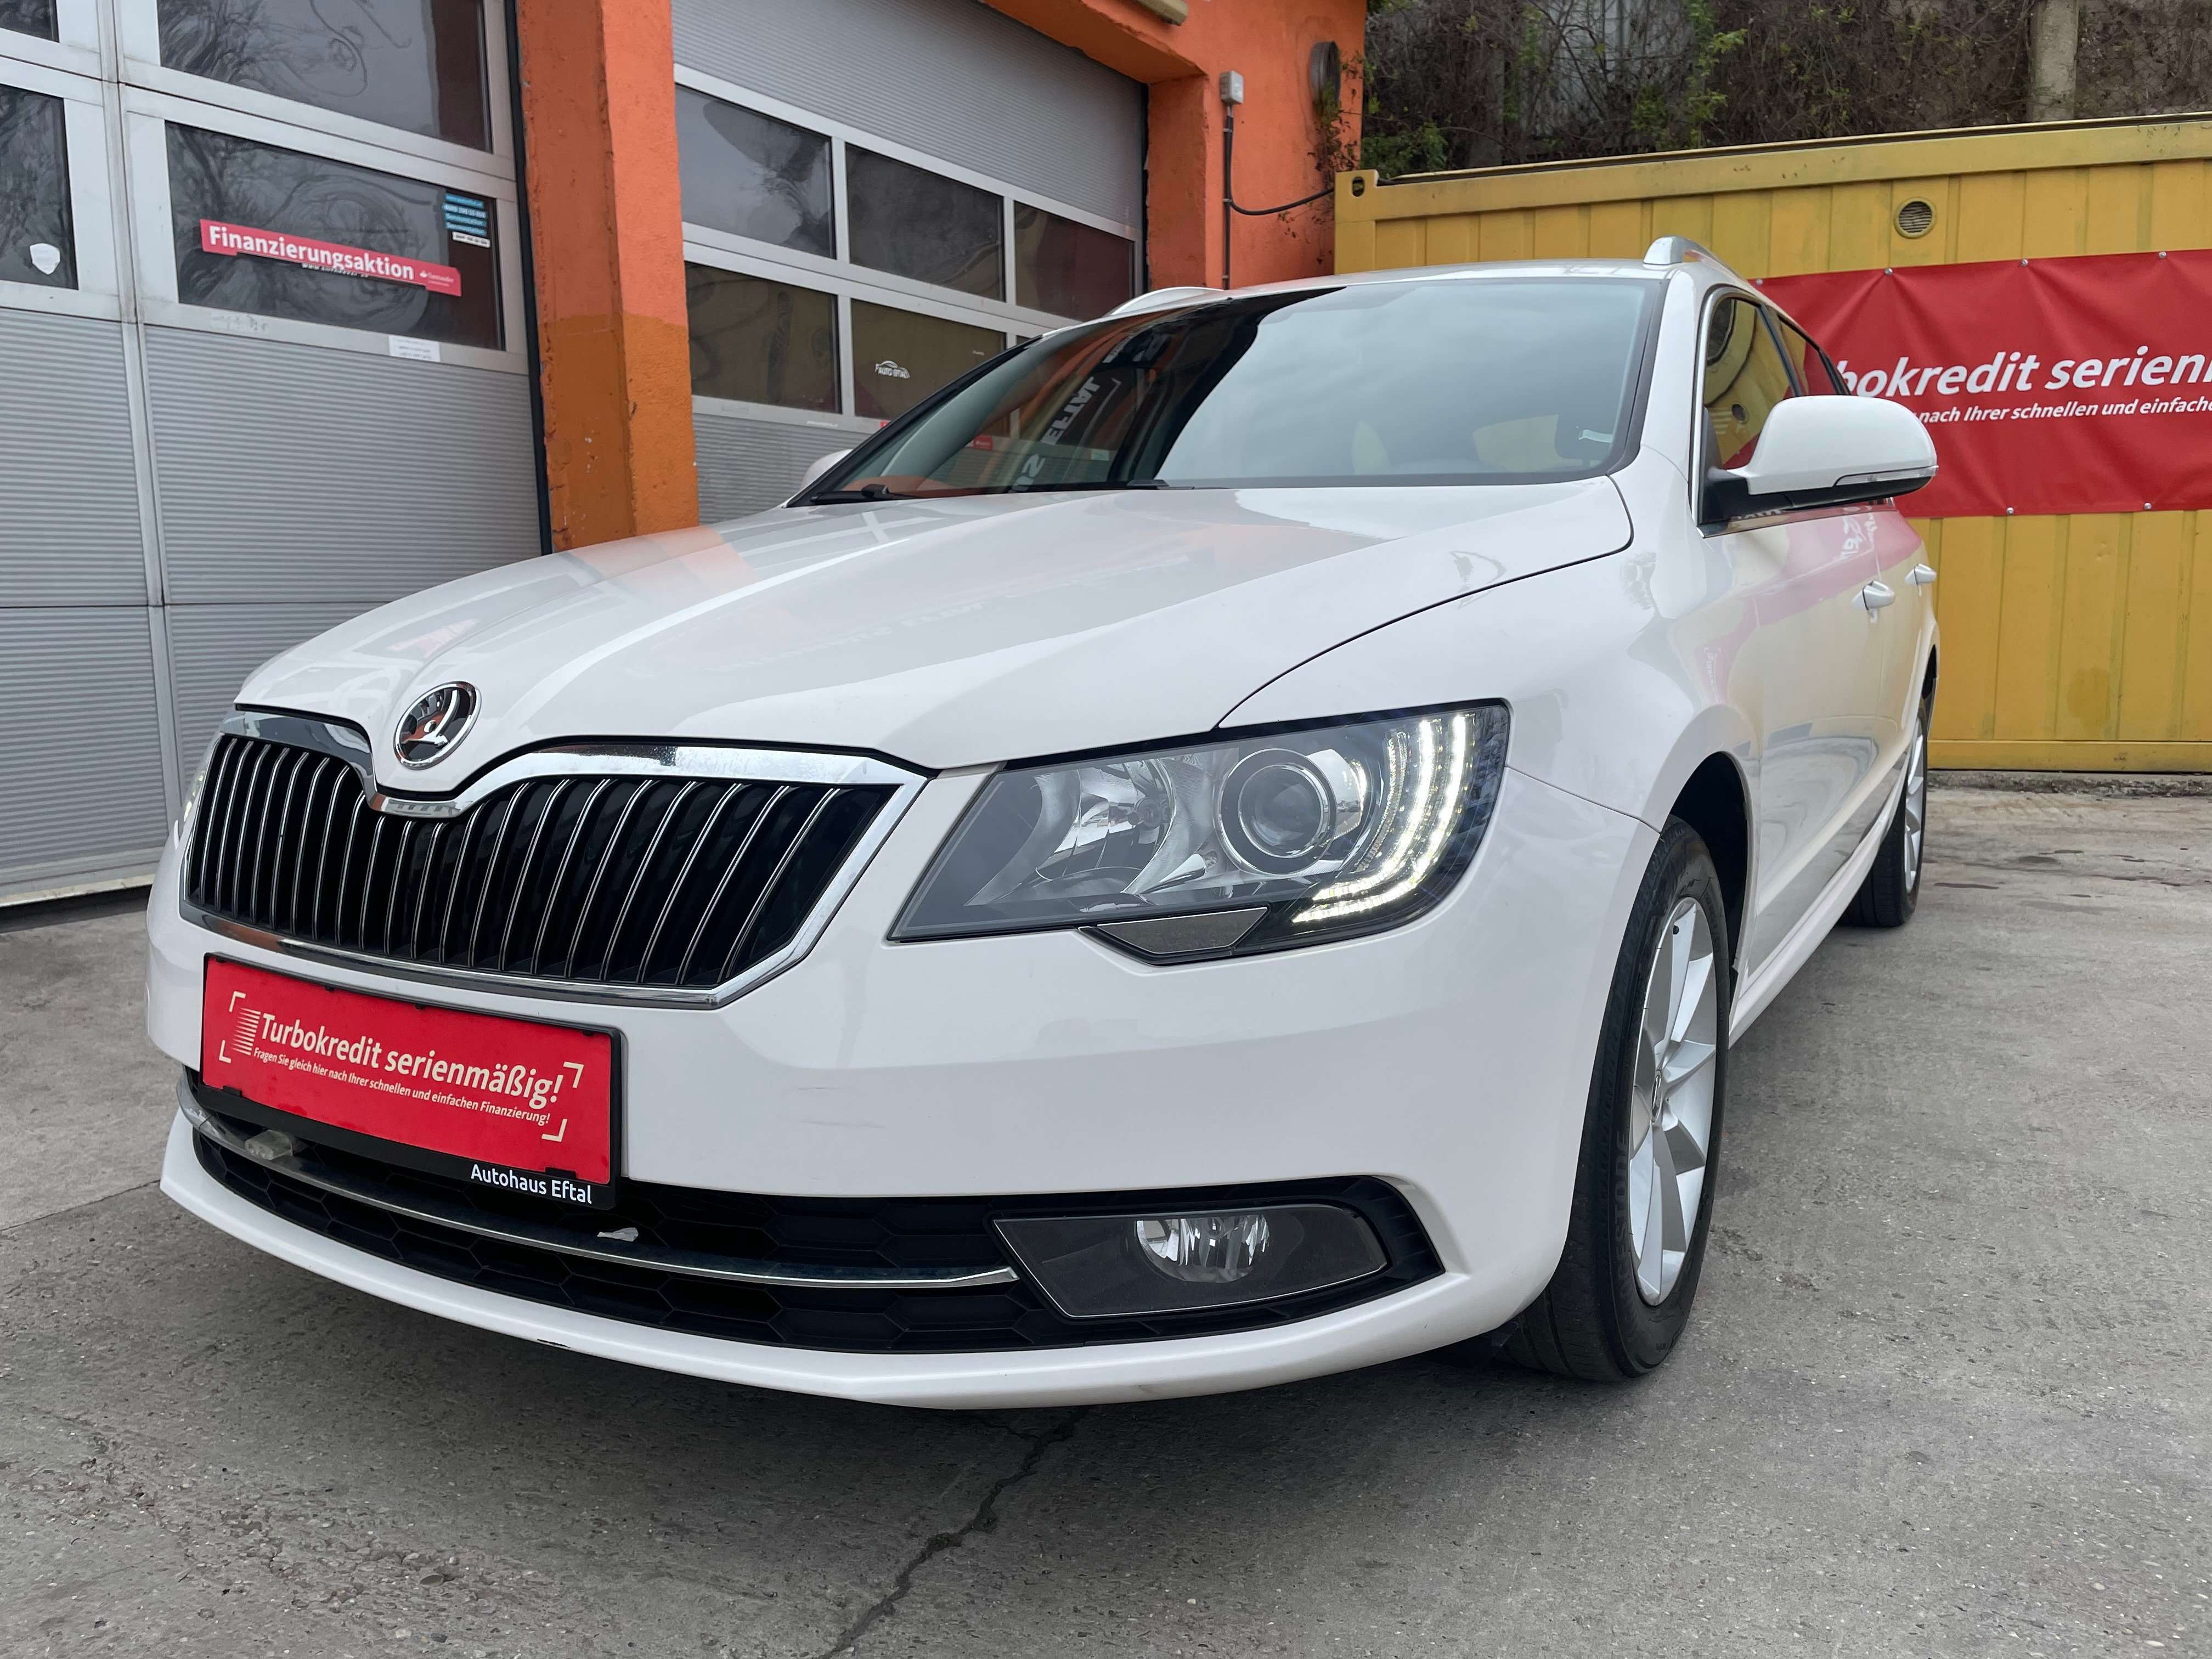 Skoda Superb Station wagon in White used in Wien for € 11,980.-